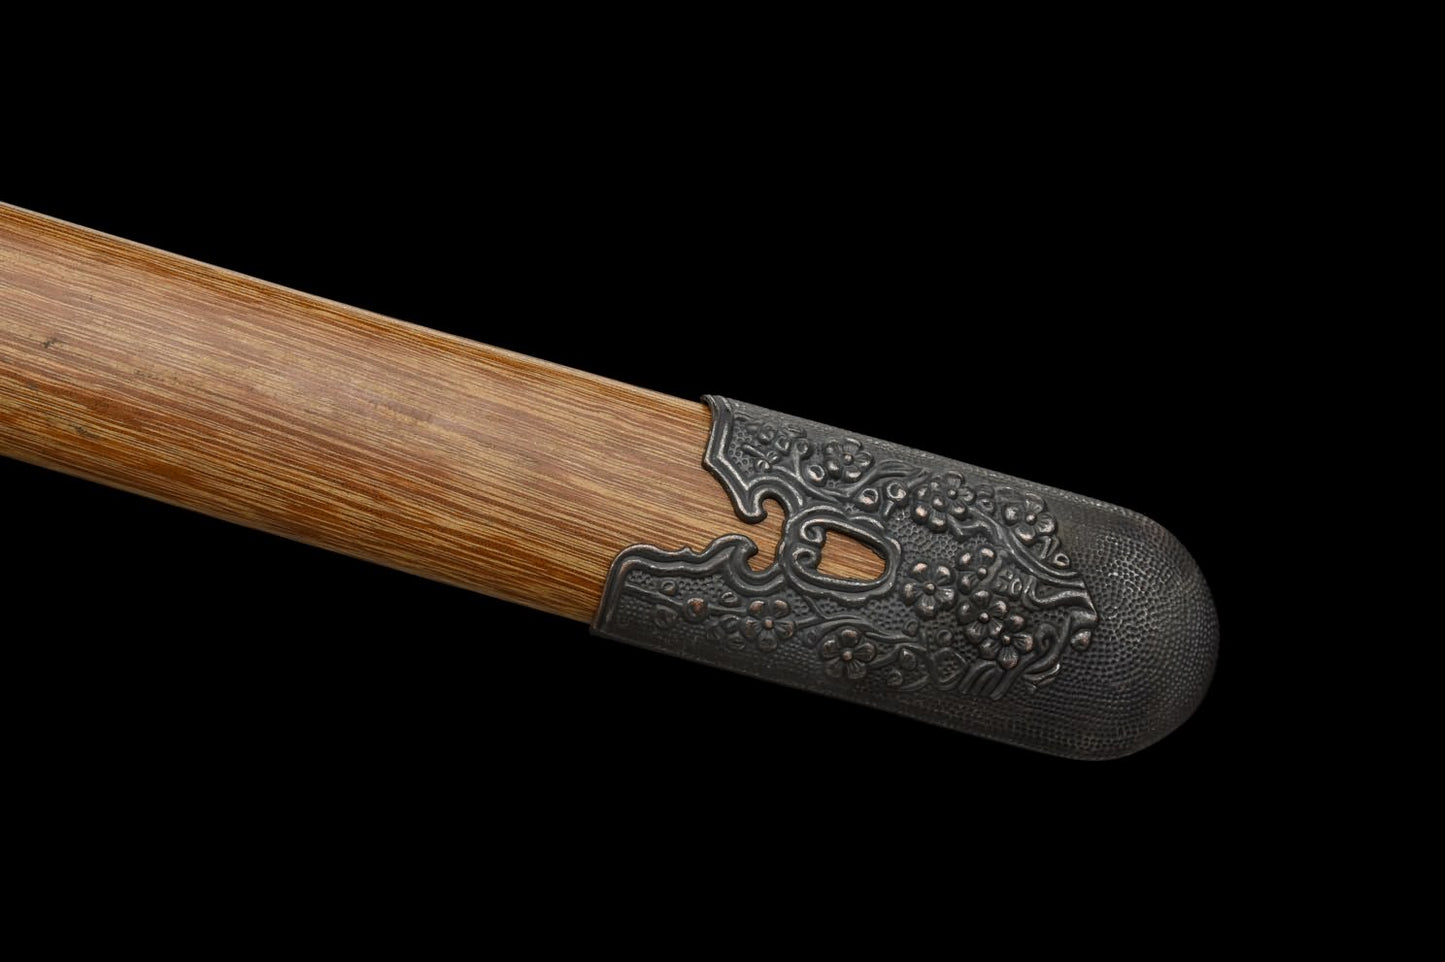 Qing dao,Hand Forged Damascus Steel Blade,Rosewood Scabbard,Alloy Fittings